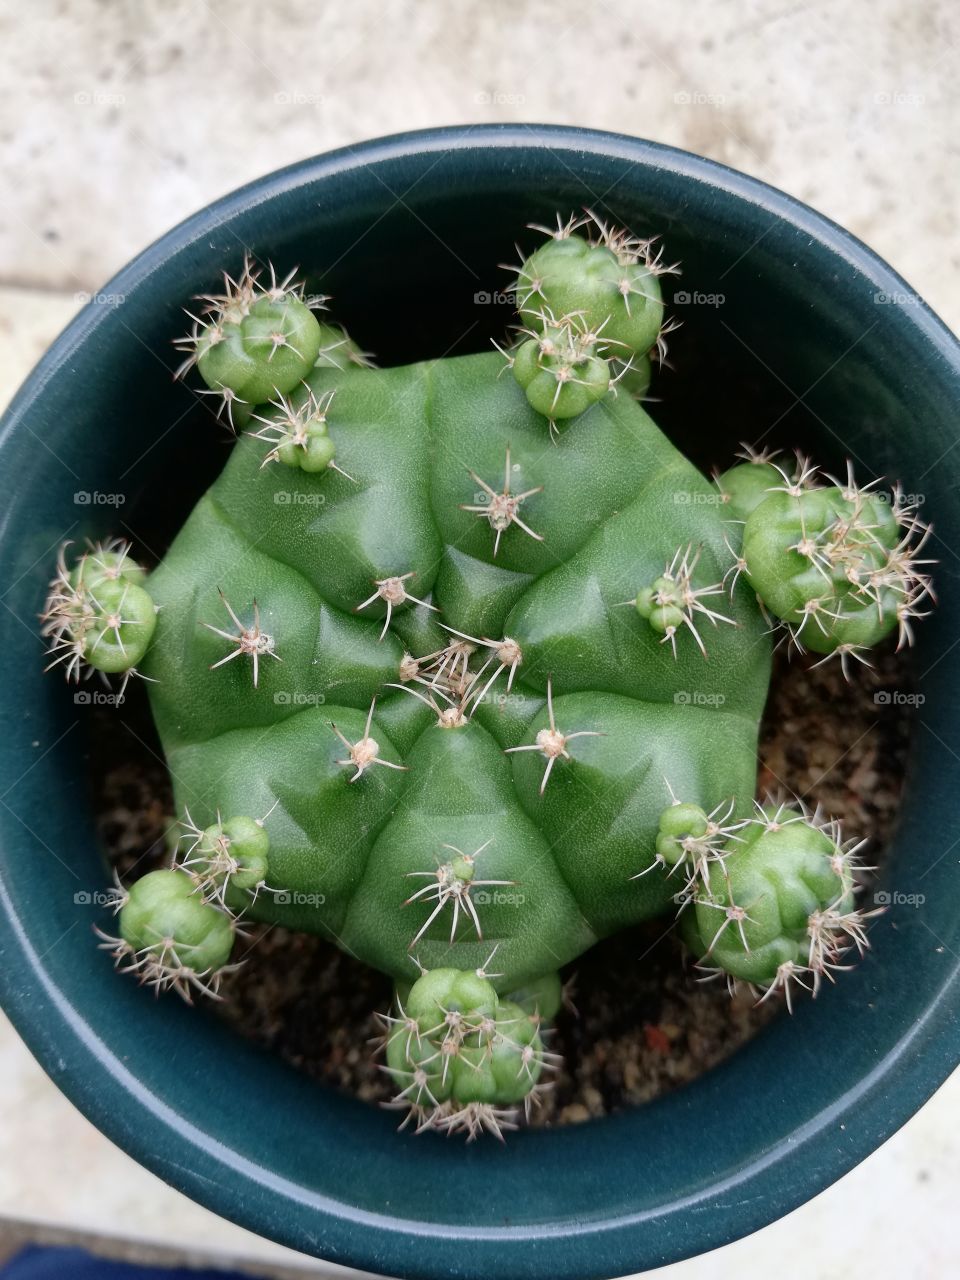 Round cacti grown in a round bowl. New borns emerged around mother cacti.